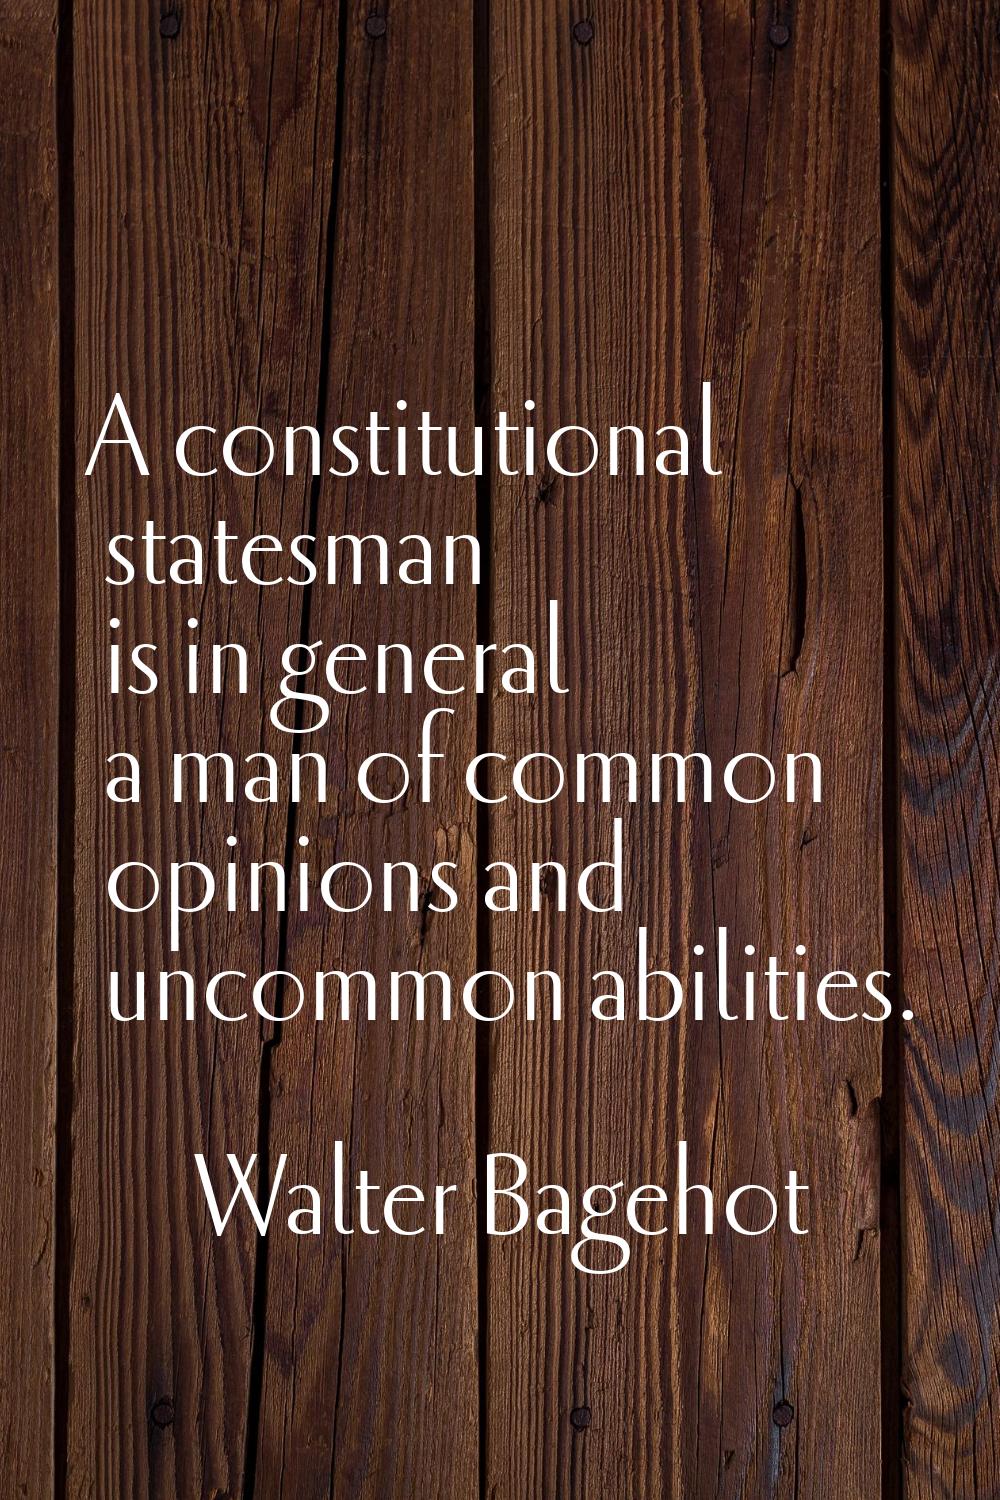 A constitutional statesman is in general a man of common opinions and uncommon abilities.